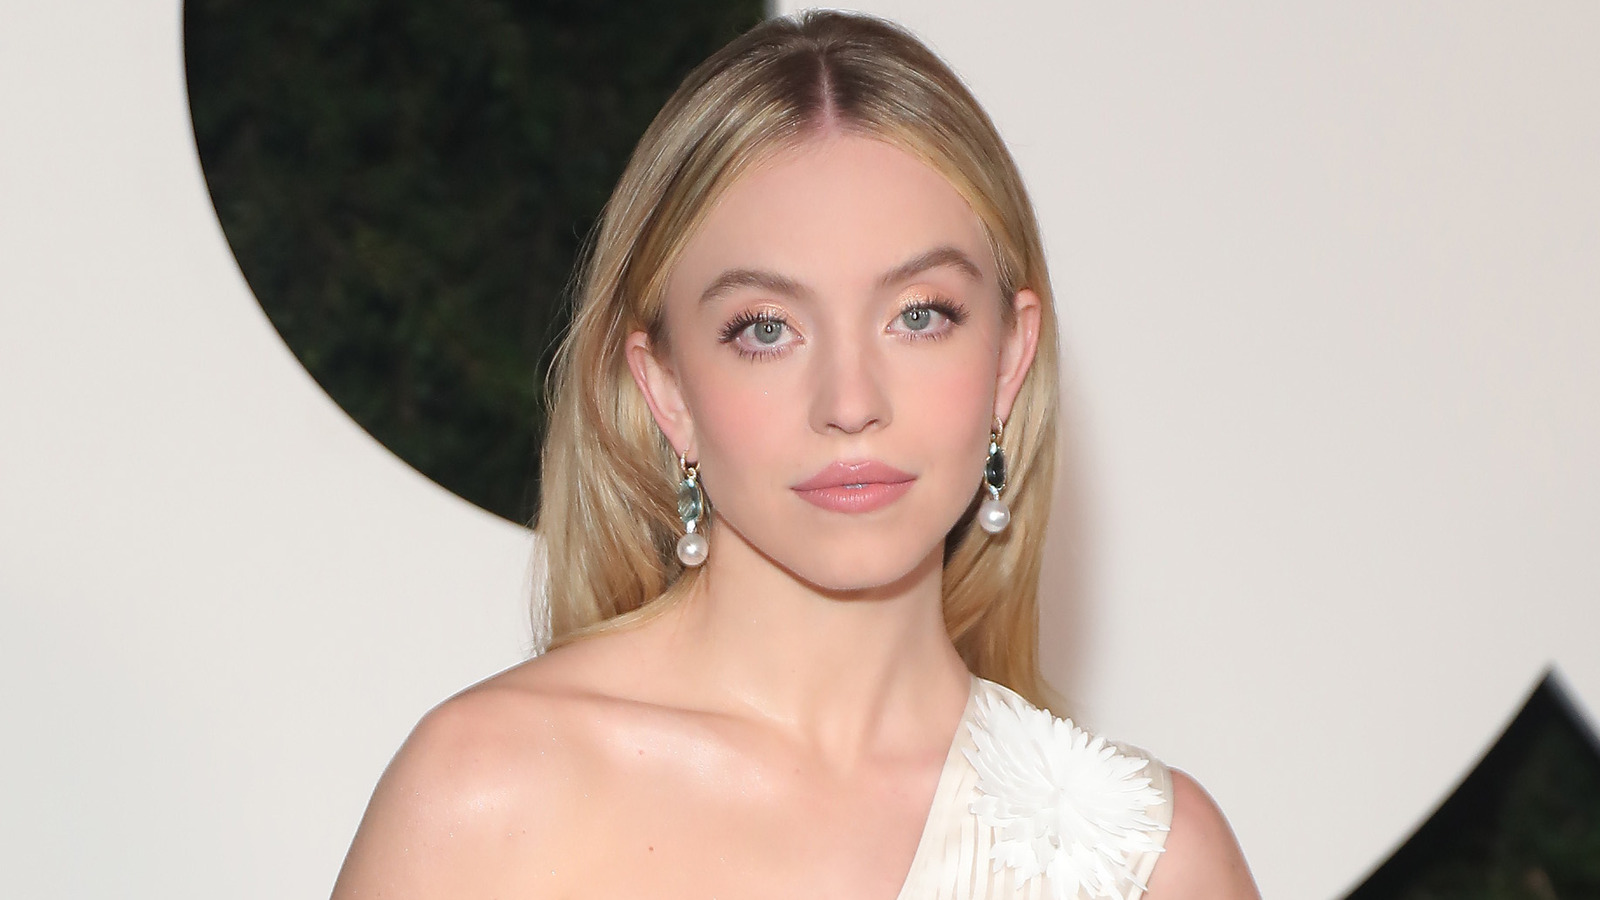 Sydney Sweeney And Fiancé Jonathan Davino Have A Bigger Age Gap Than You Thought